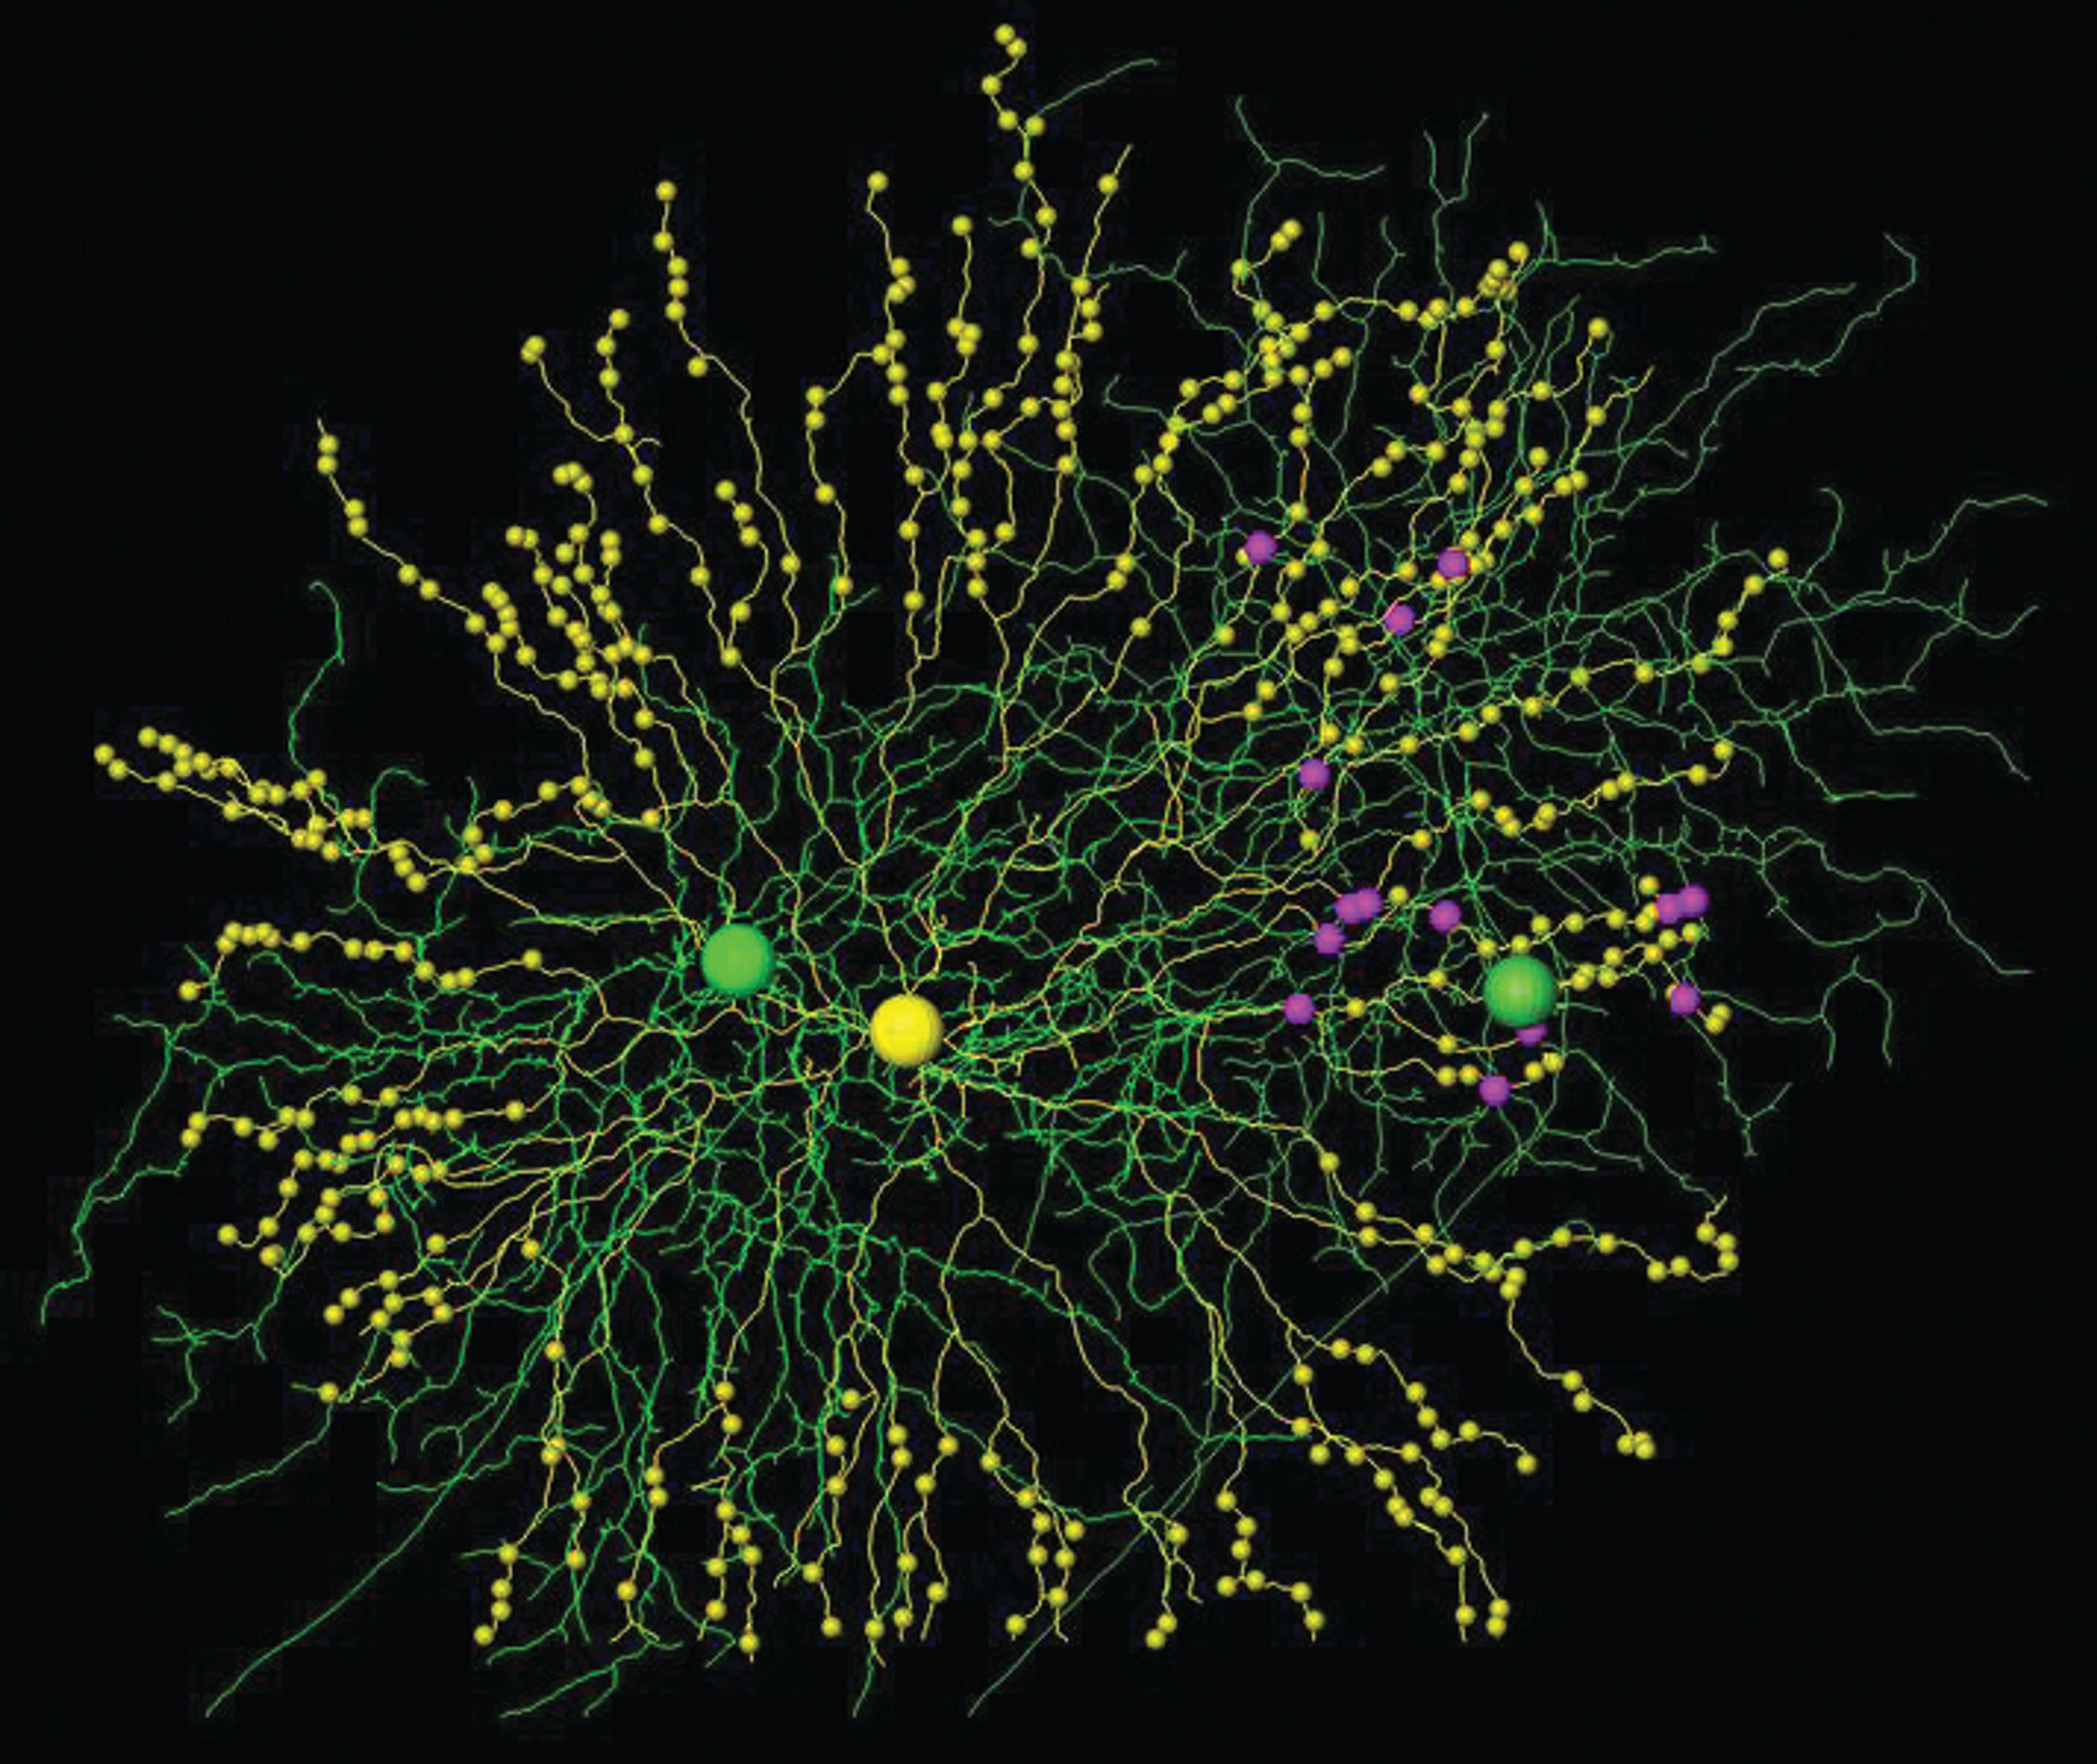 Cells and synapses reconstructed from serial block face electron microscopy data. A single starburst amacrine cell (yellow, note synaptic varicosities) and two direction-selective ganglion cells (green). Even though there is substantial dendritic overlap with both cells, all connections (magenta) go to the right ganglion cell